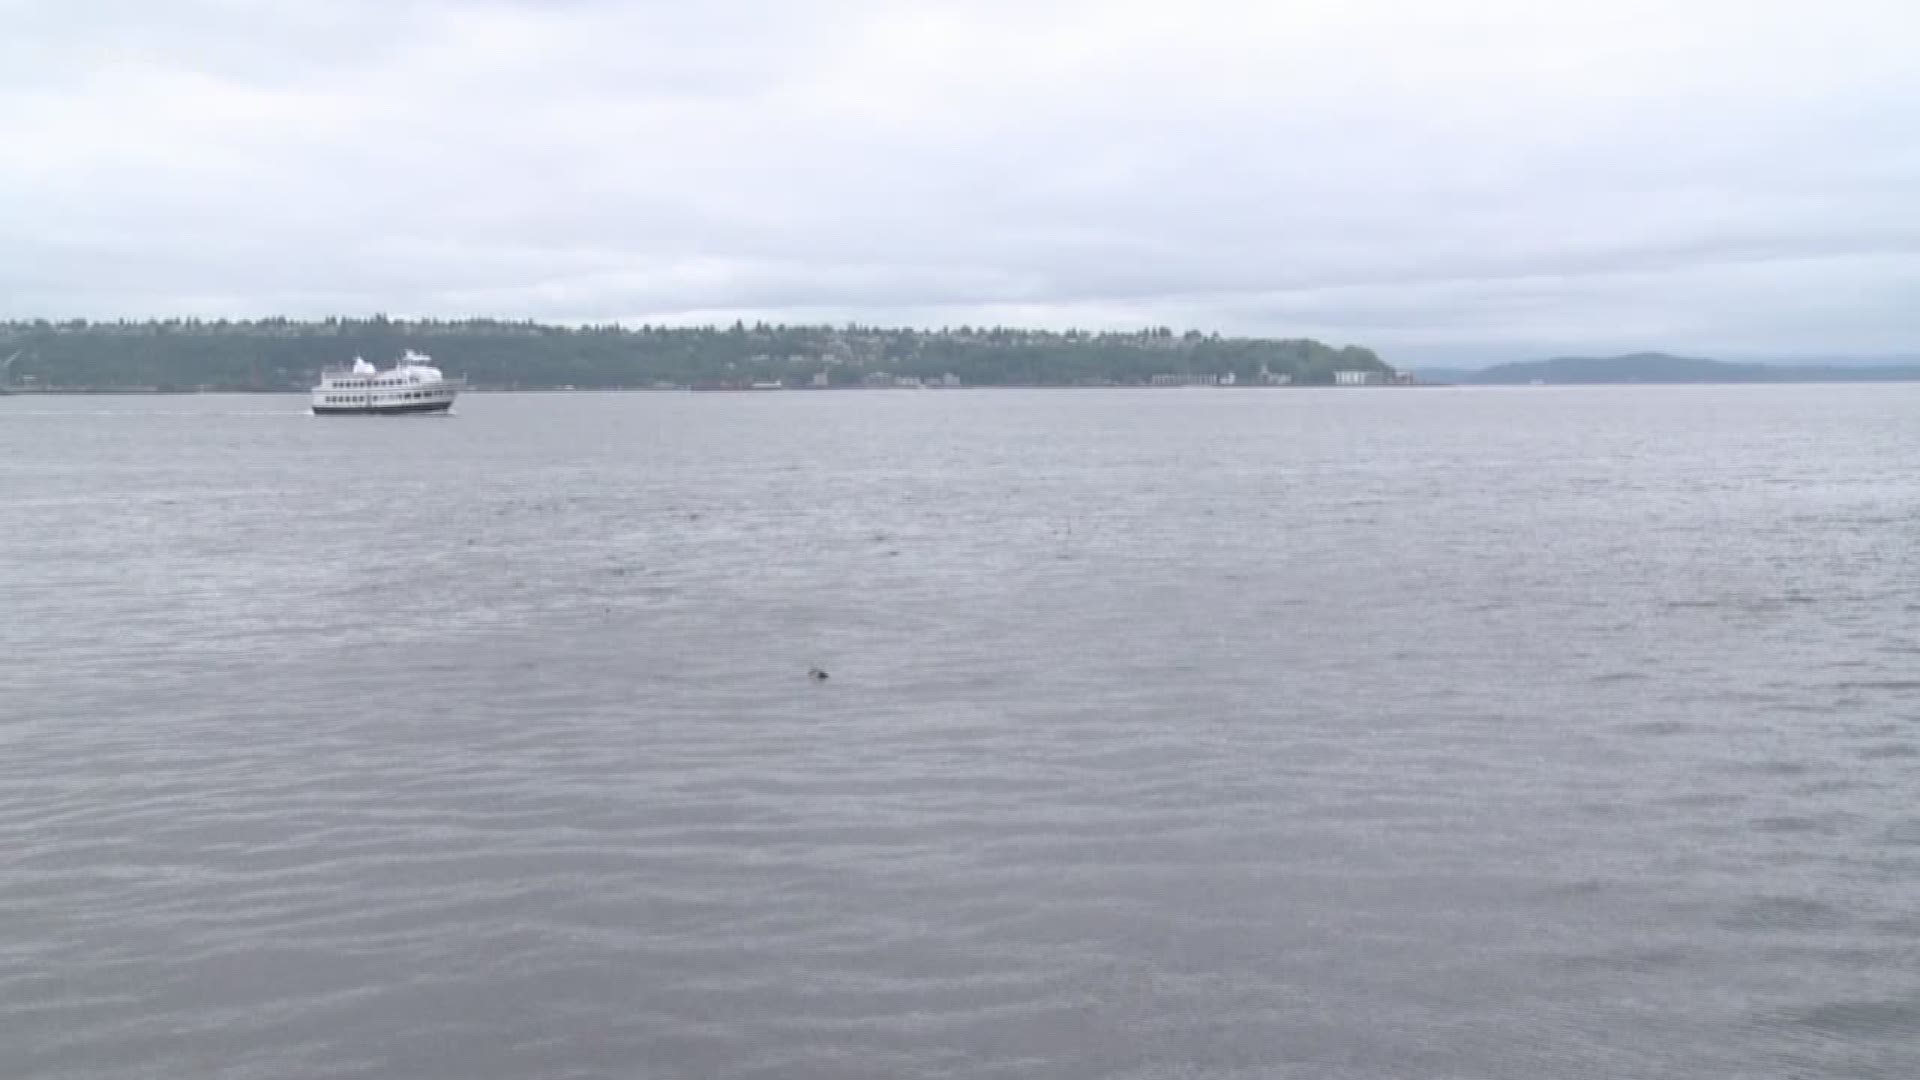 The Department of Ecology announced Tuesday that boats can no longer dump human waste into Puget Sound. Right now boats can dump raw sewage in Puget Sound if they are three miles from shore, and partially treated sewage can be dumped overboard from anywhe